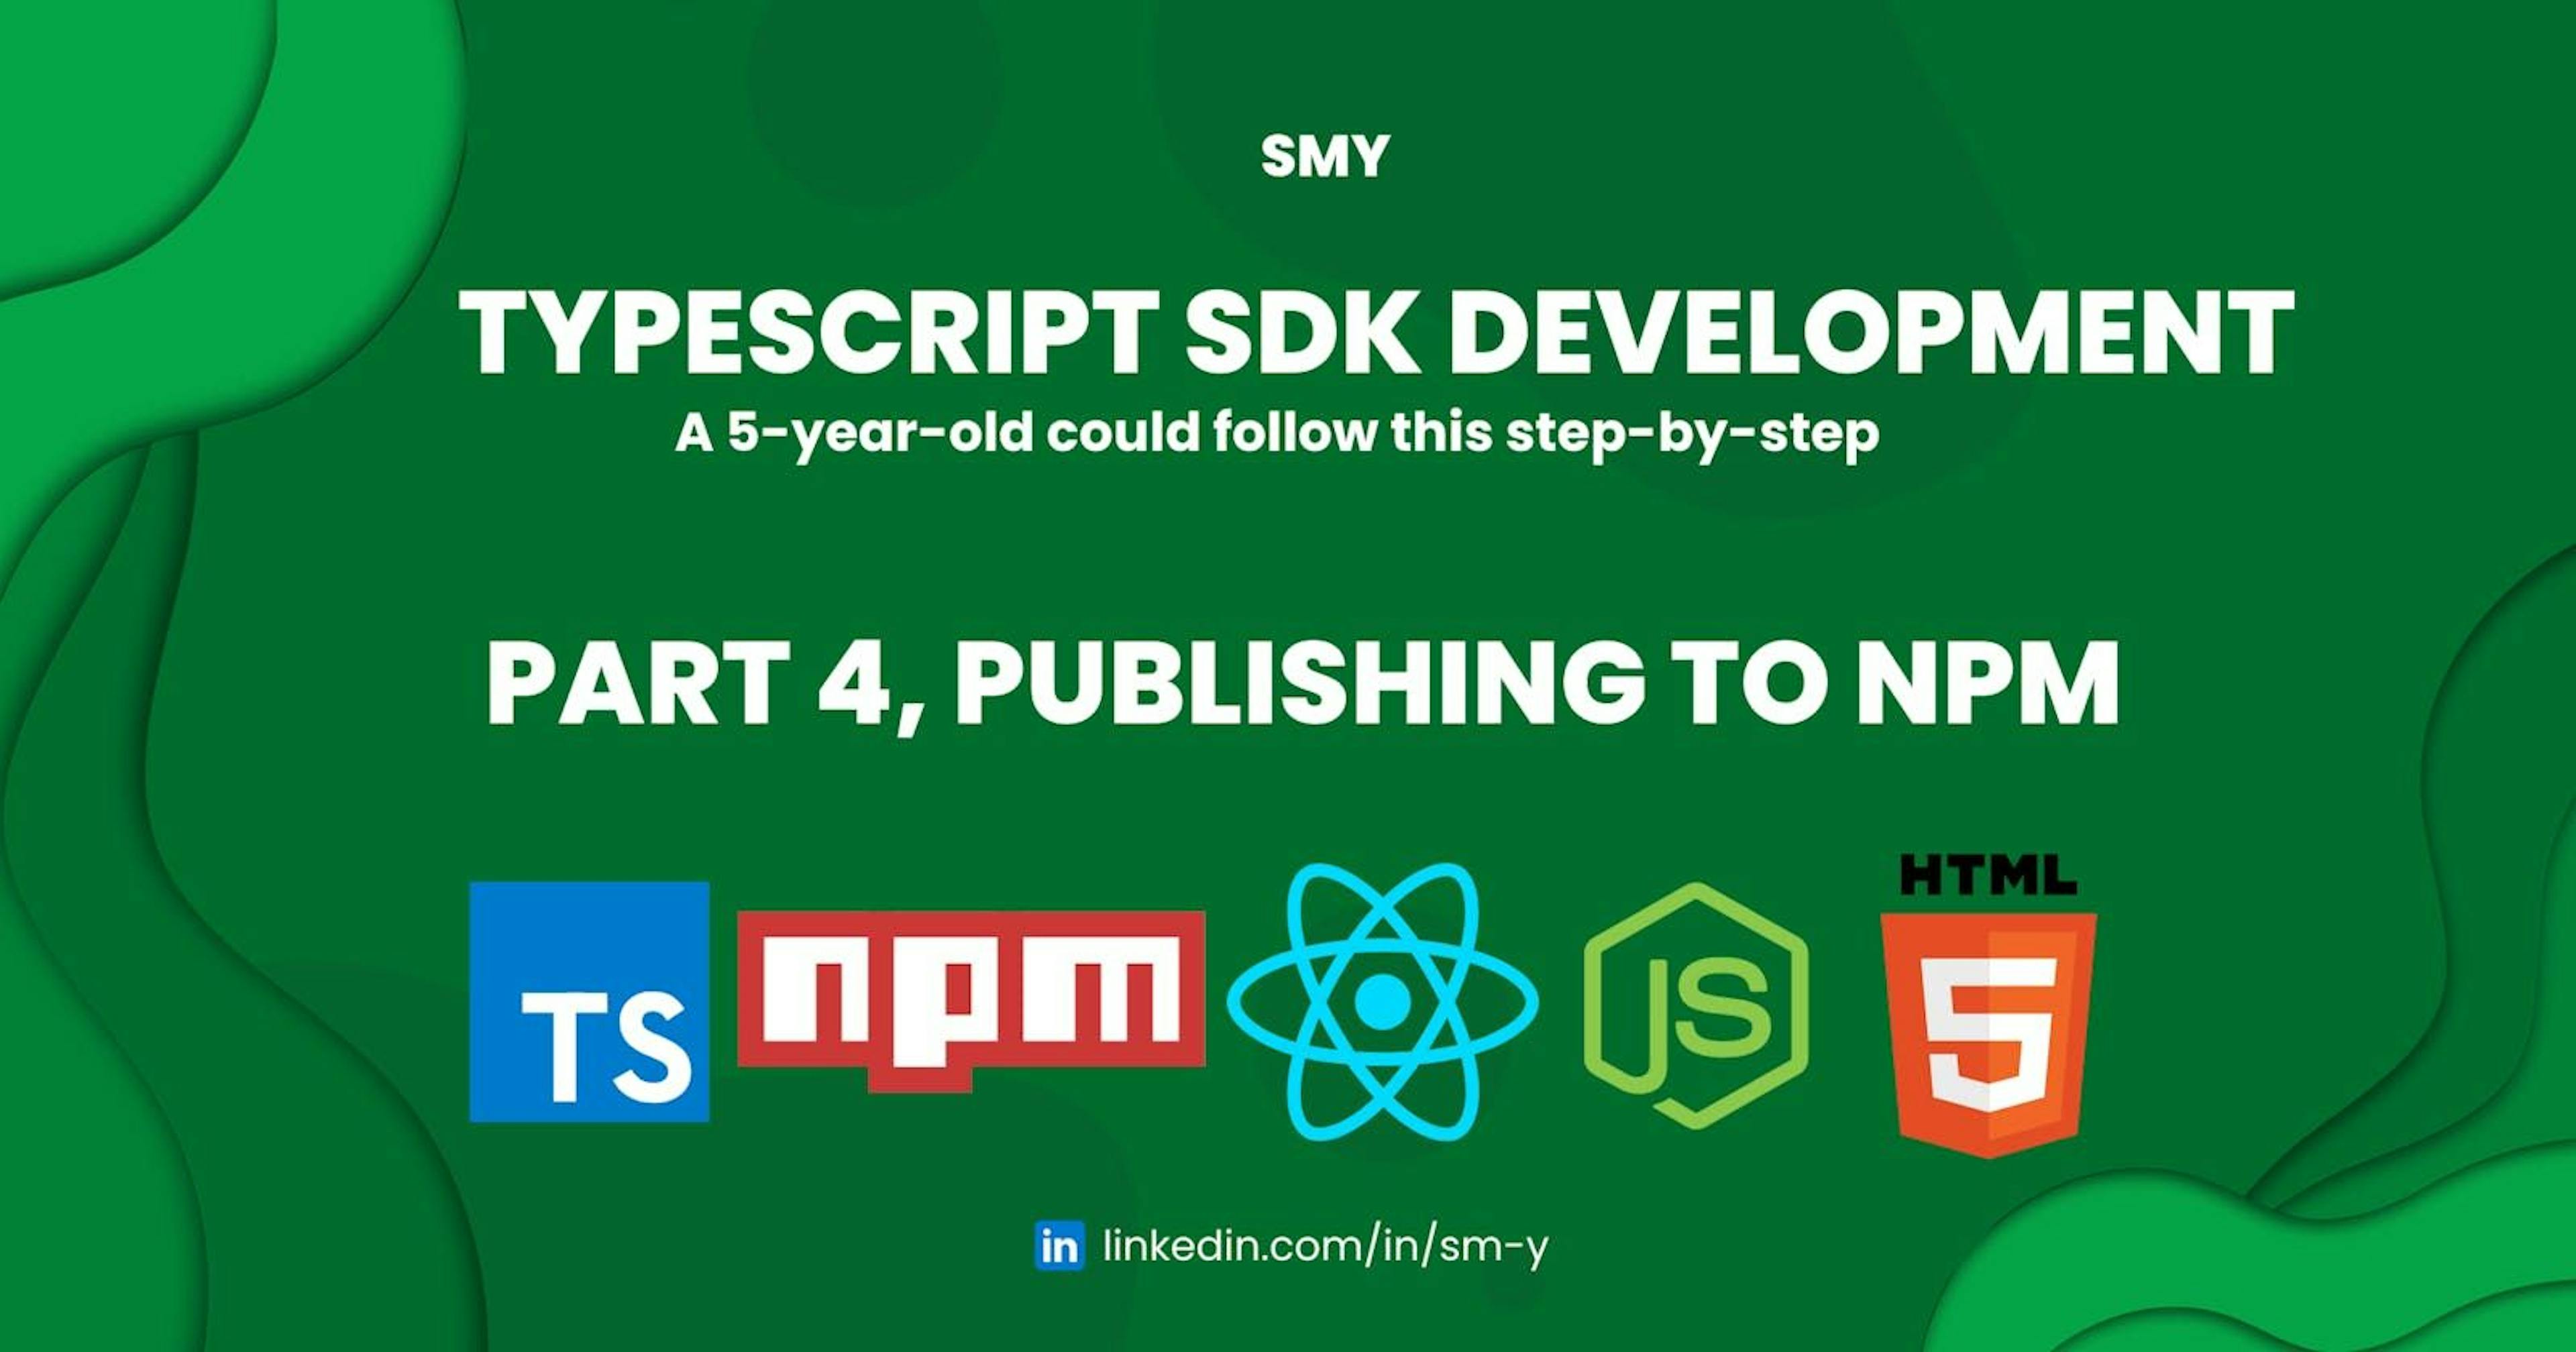 featured image - A 5-Year-Old Could Follow This TypeScript SDK Development Guide ~ Part 4: Publishing to NPM